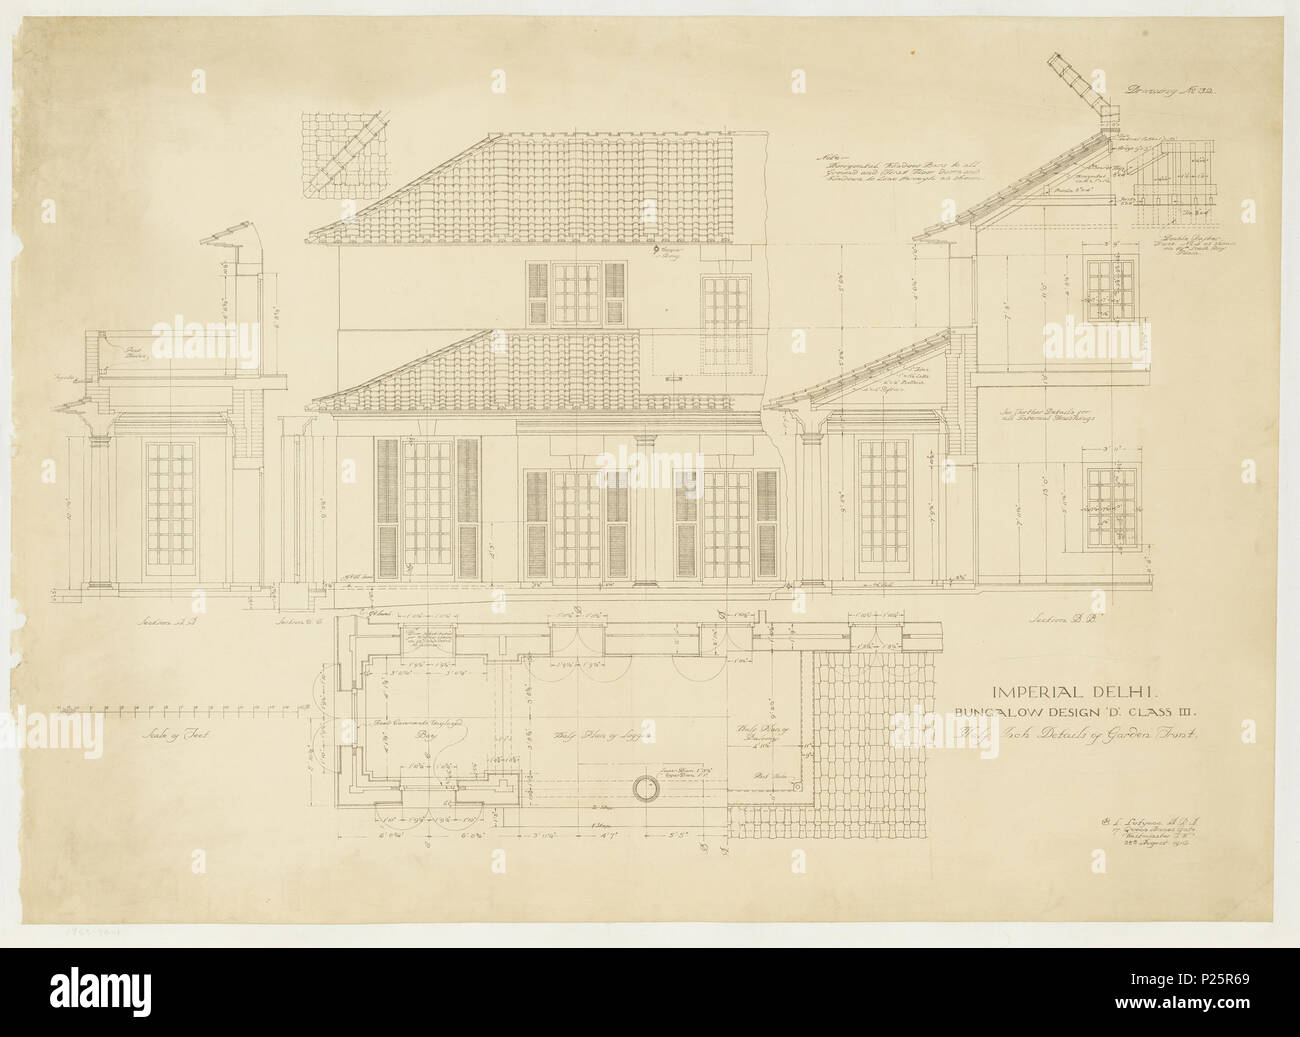 .  English: Print, Imperial Delhi, Bungalow Design 'D' Class III, August 25, 1916 .  English: Architectural print depicting the plan and elevation of a domestic building depicting a garden-front view of a bungalow. Printed notations with measurements and inscriptions throughout . 25 August 1916 268 Print, Imperial Delhi, Bungalow Design &quot;D&quot; Class III, August 25, 1916 (CH 18451113) Stock Photo